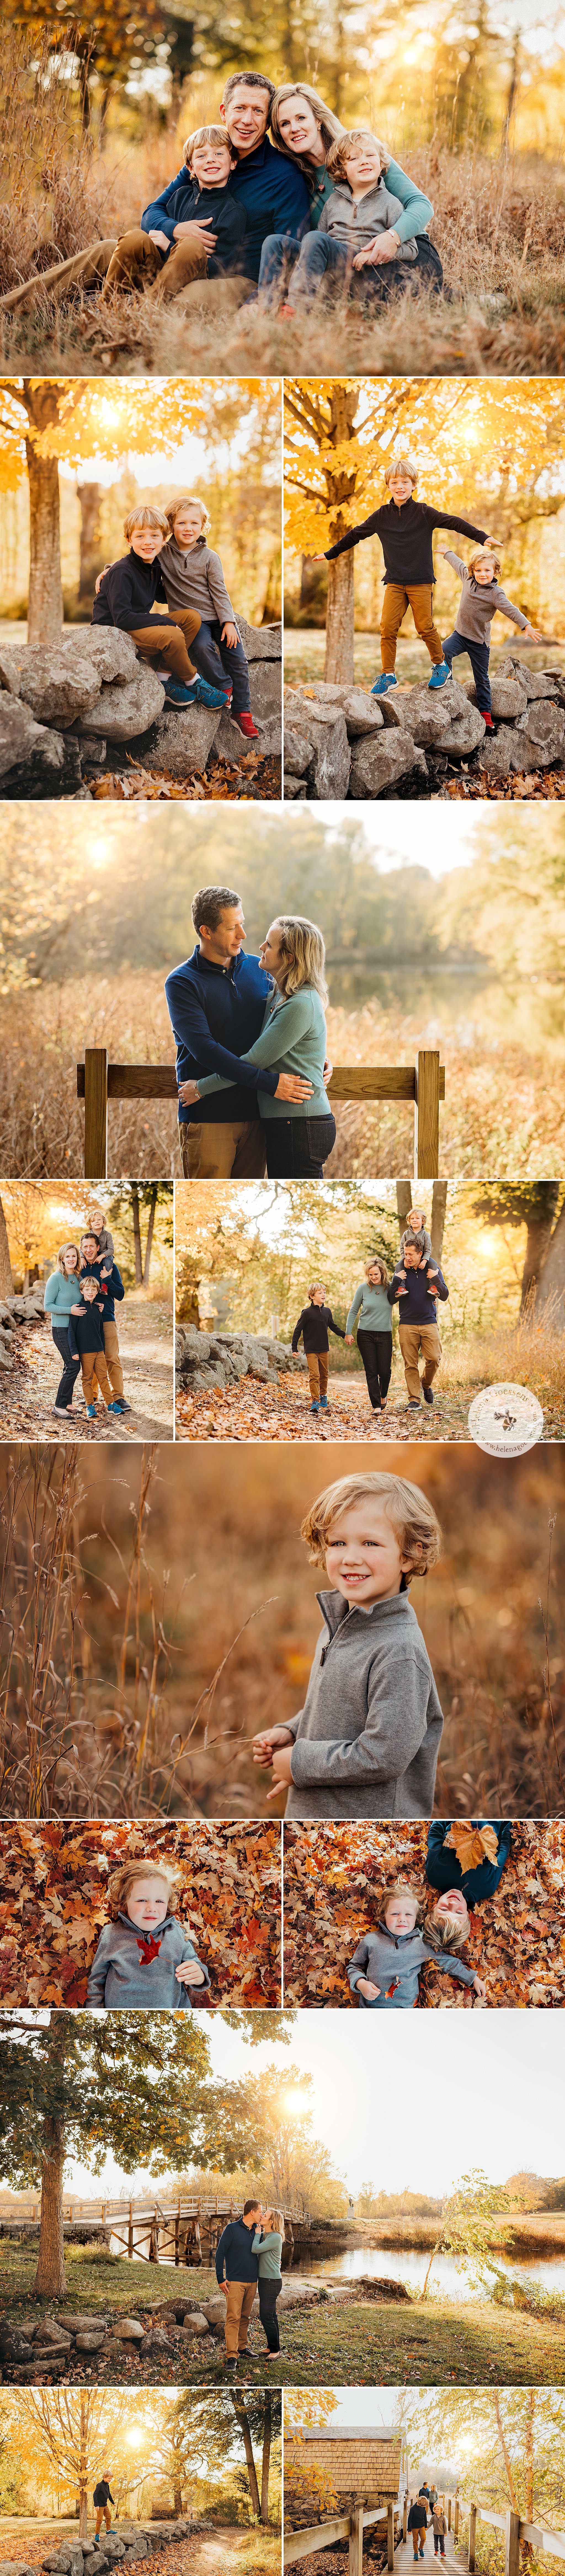 Fall Family Portraits with Newton Family Photographer at The Old Manse photographed by Helena Goessens Photography